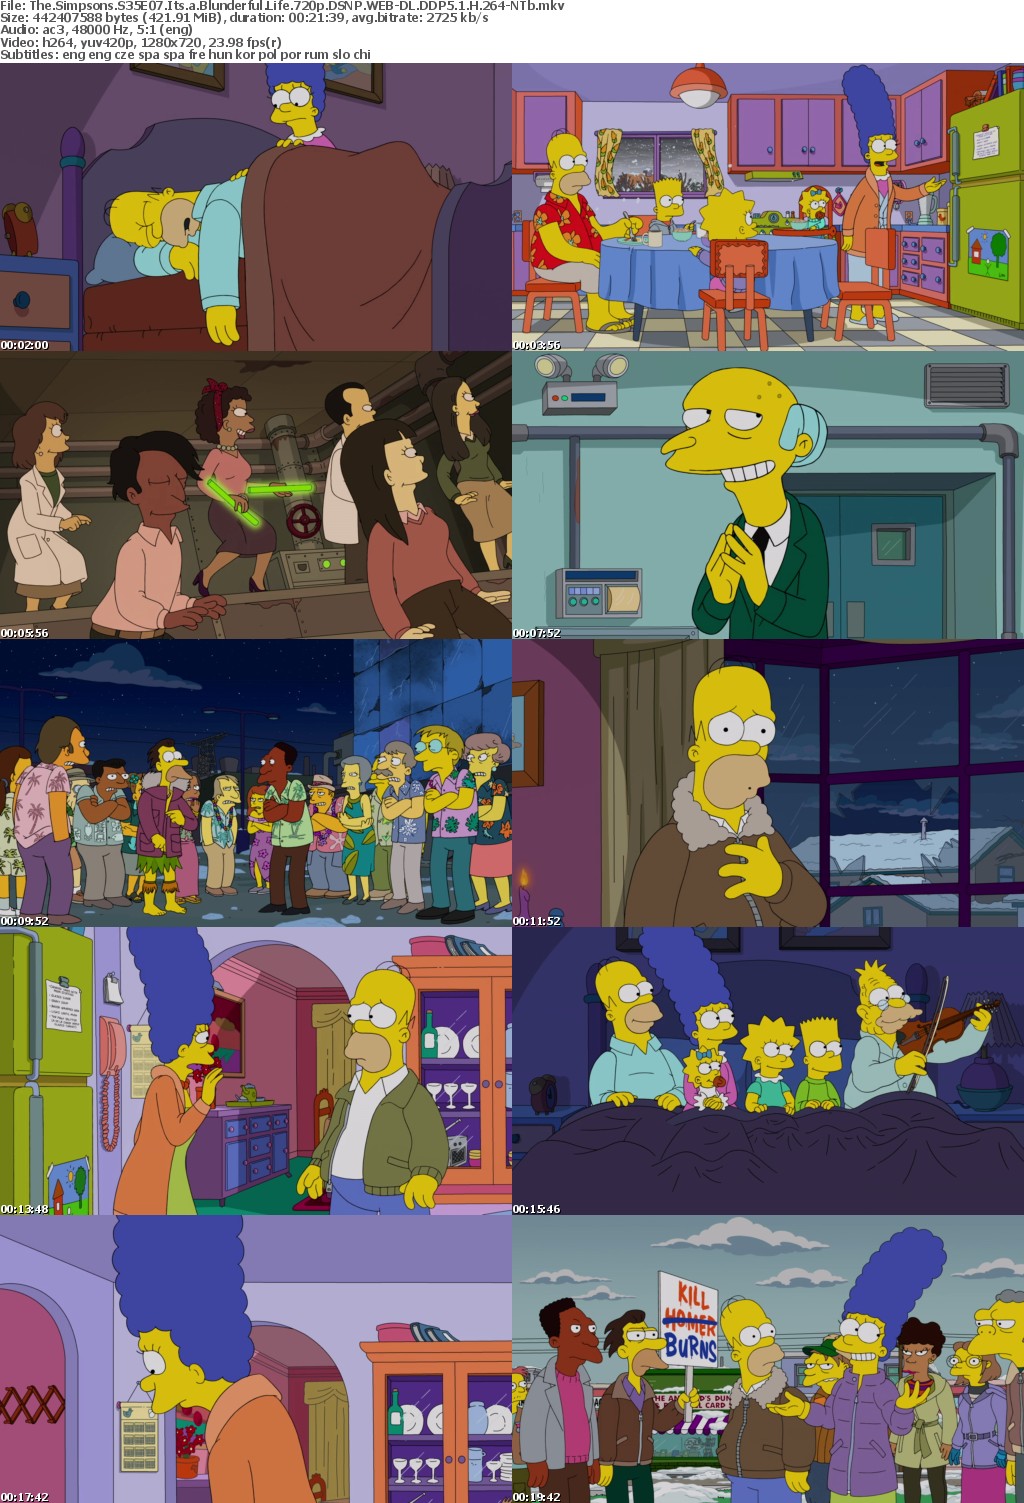 The Simpsons S35E07 Its a Blunderful Life 720p DSNP WEB-DL DDP5 1 H 264-NTb